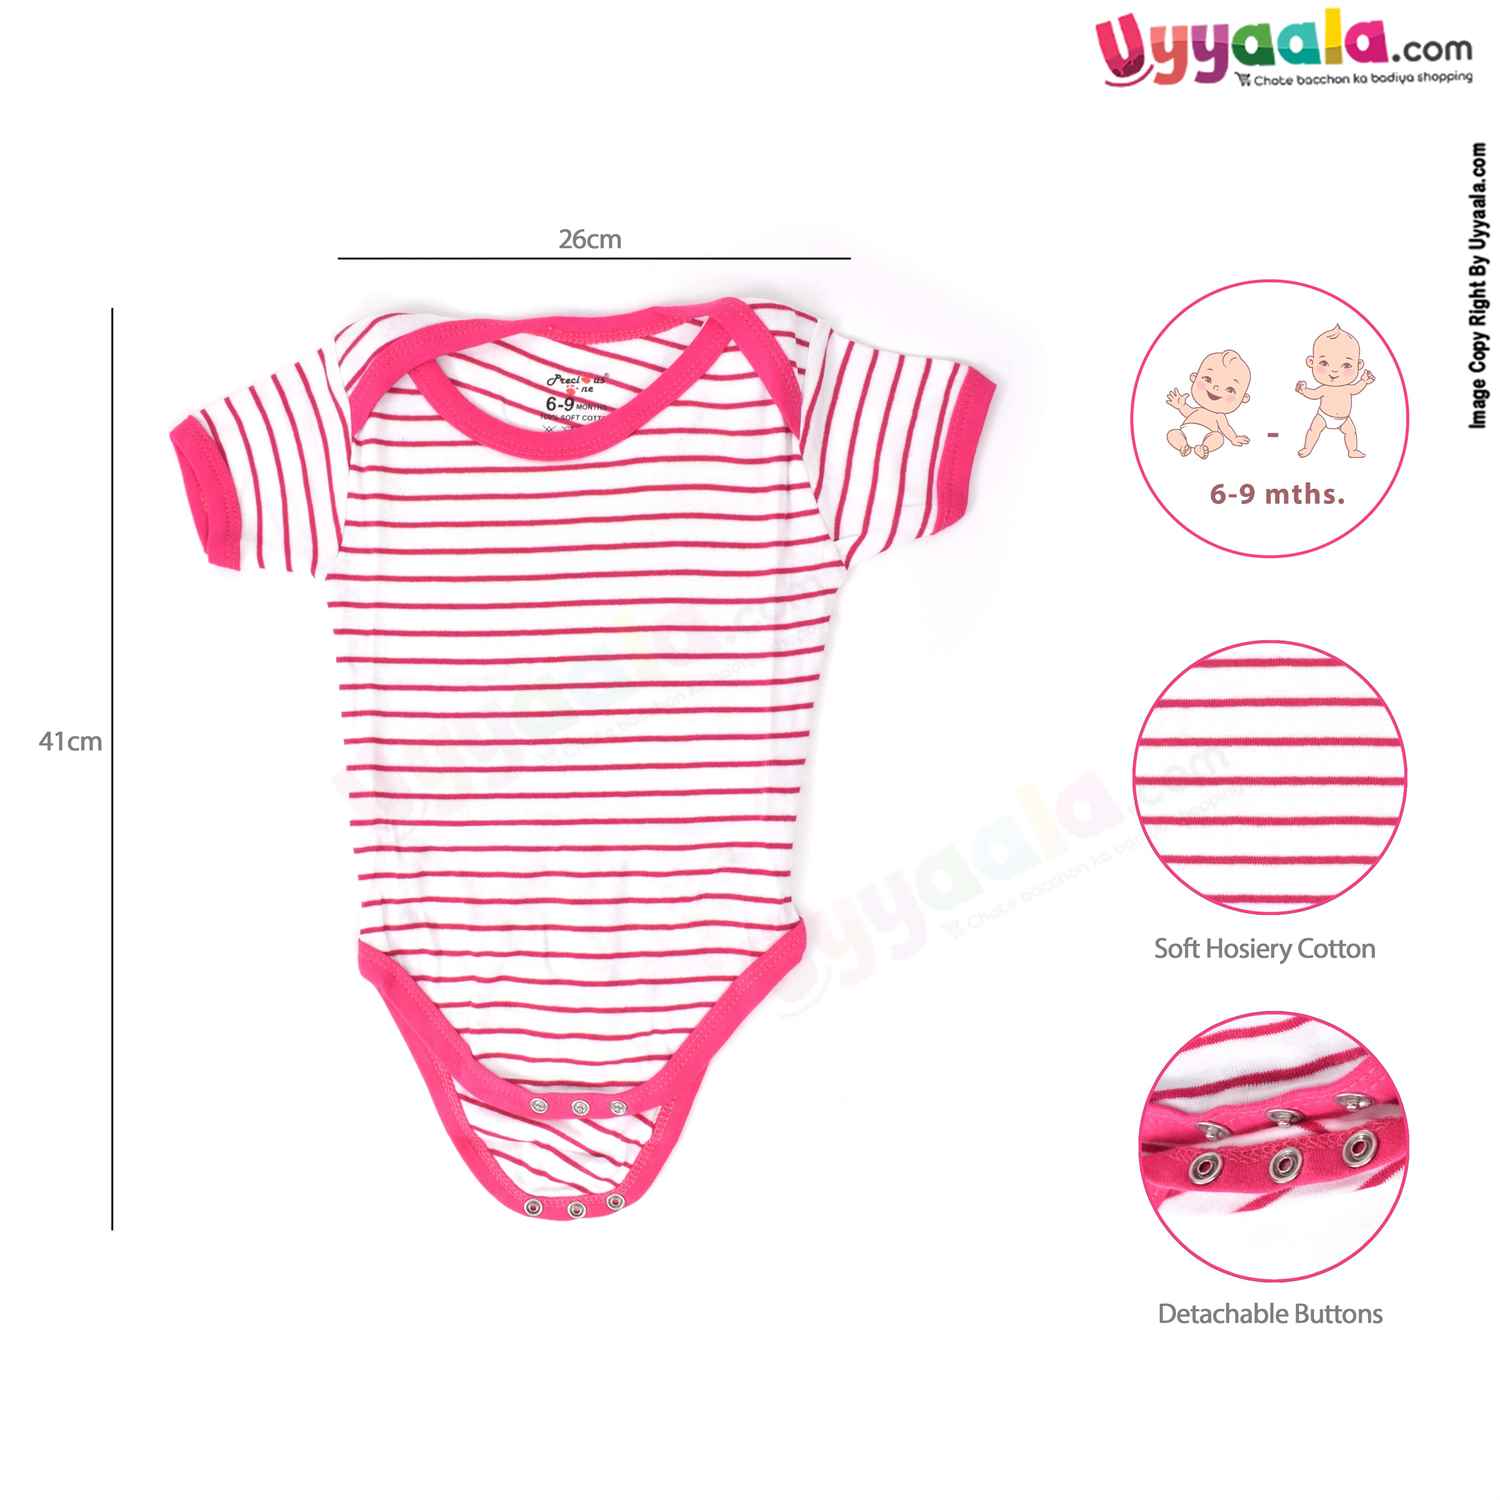 Precious One Short Sleeve Body Suit 100% Soft Hosiery Cotton - Pink & White Stripes (6-9M)